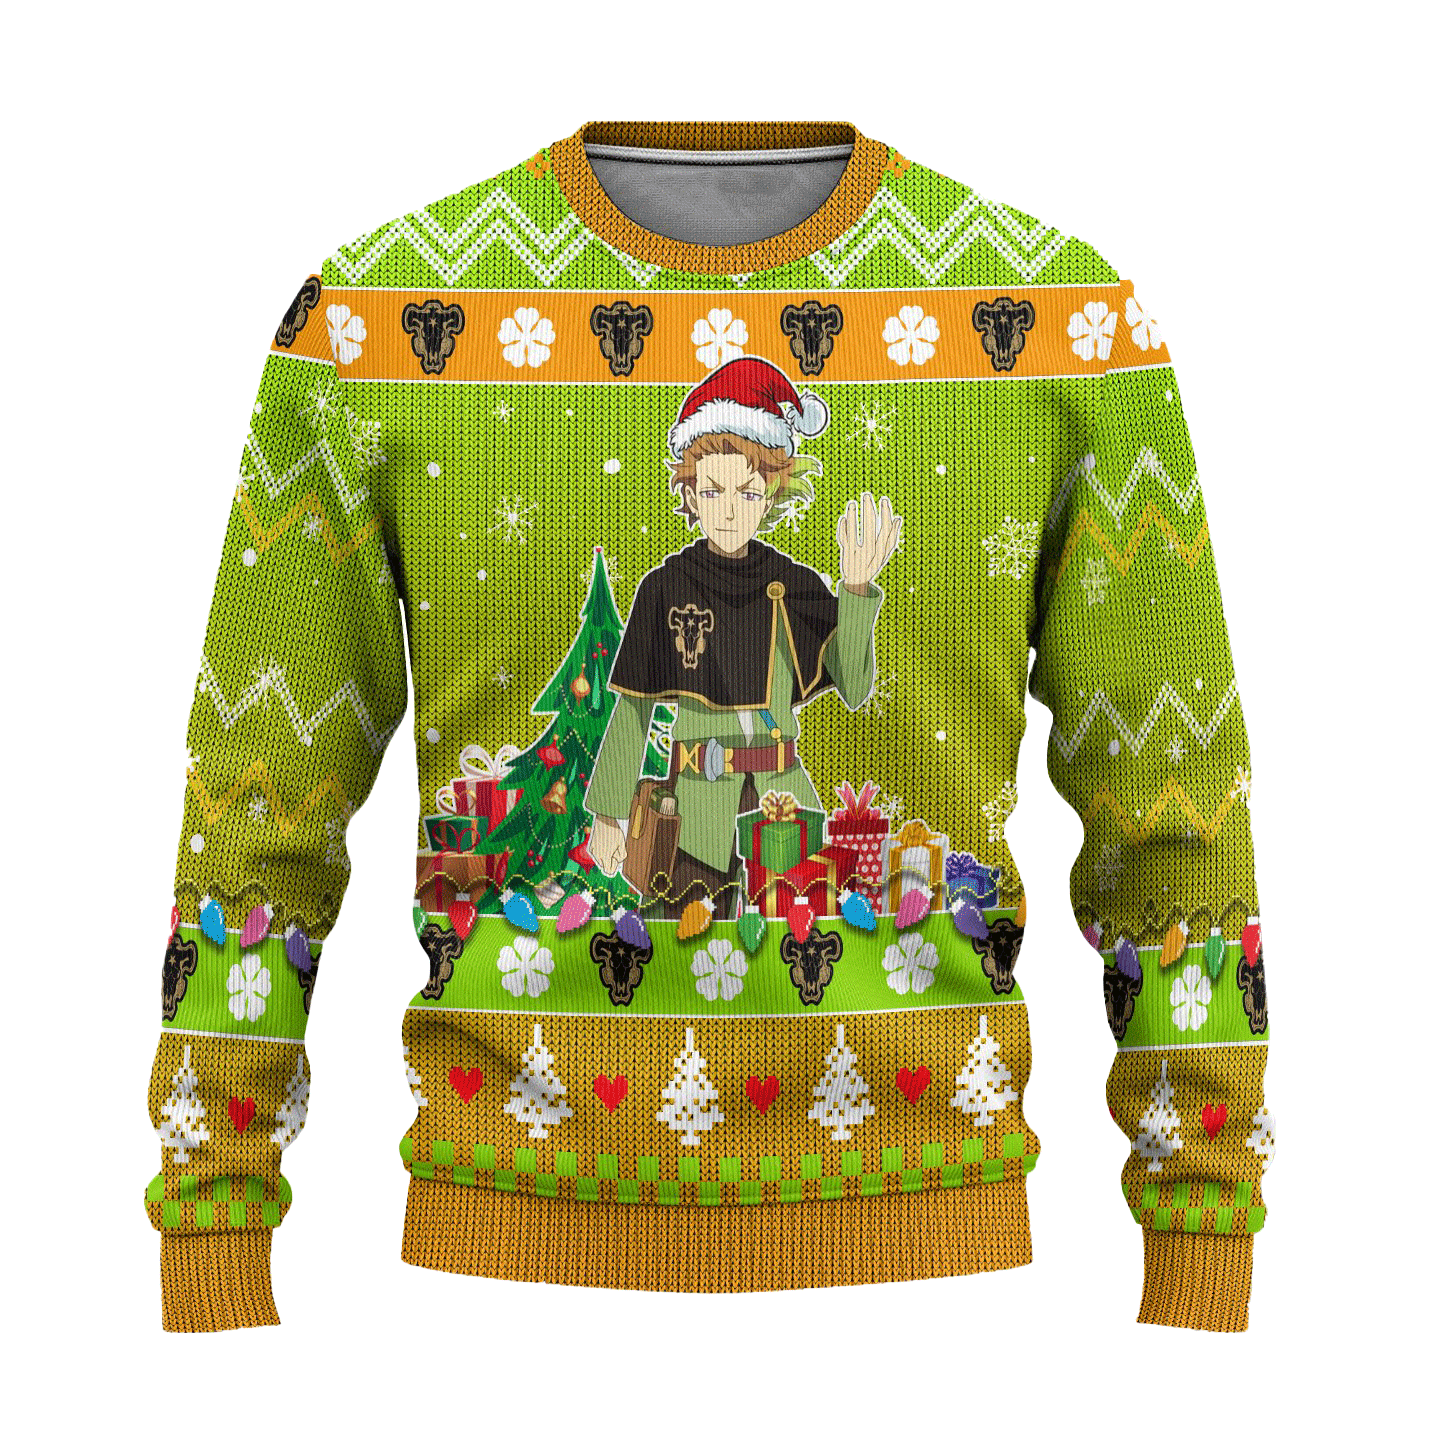 Finral Roulacase Anime Ugly Christmas Sweater Black Clover Xmas Gift